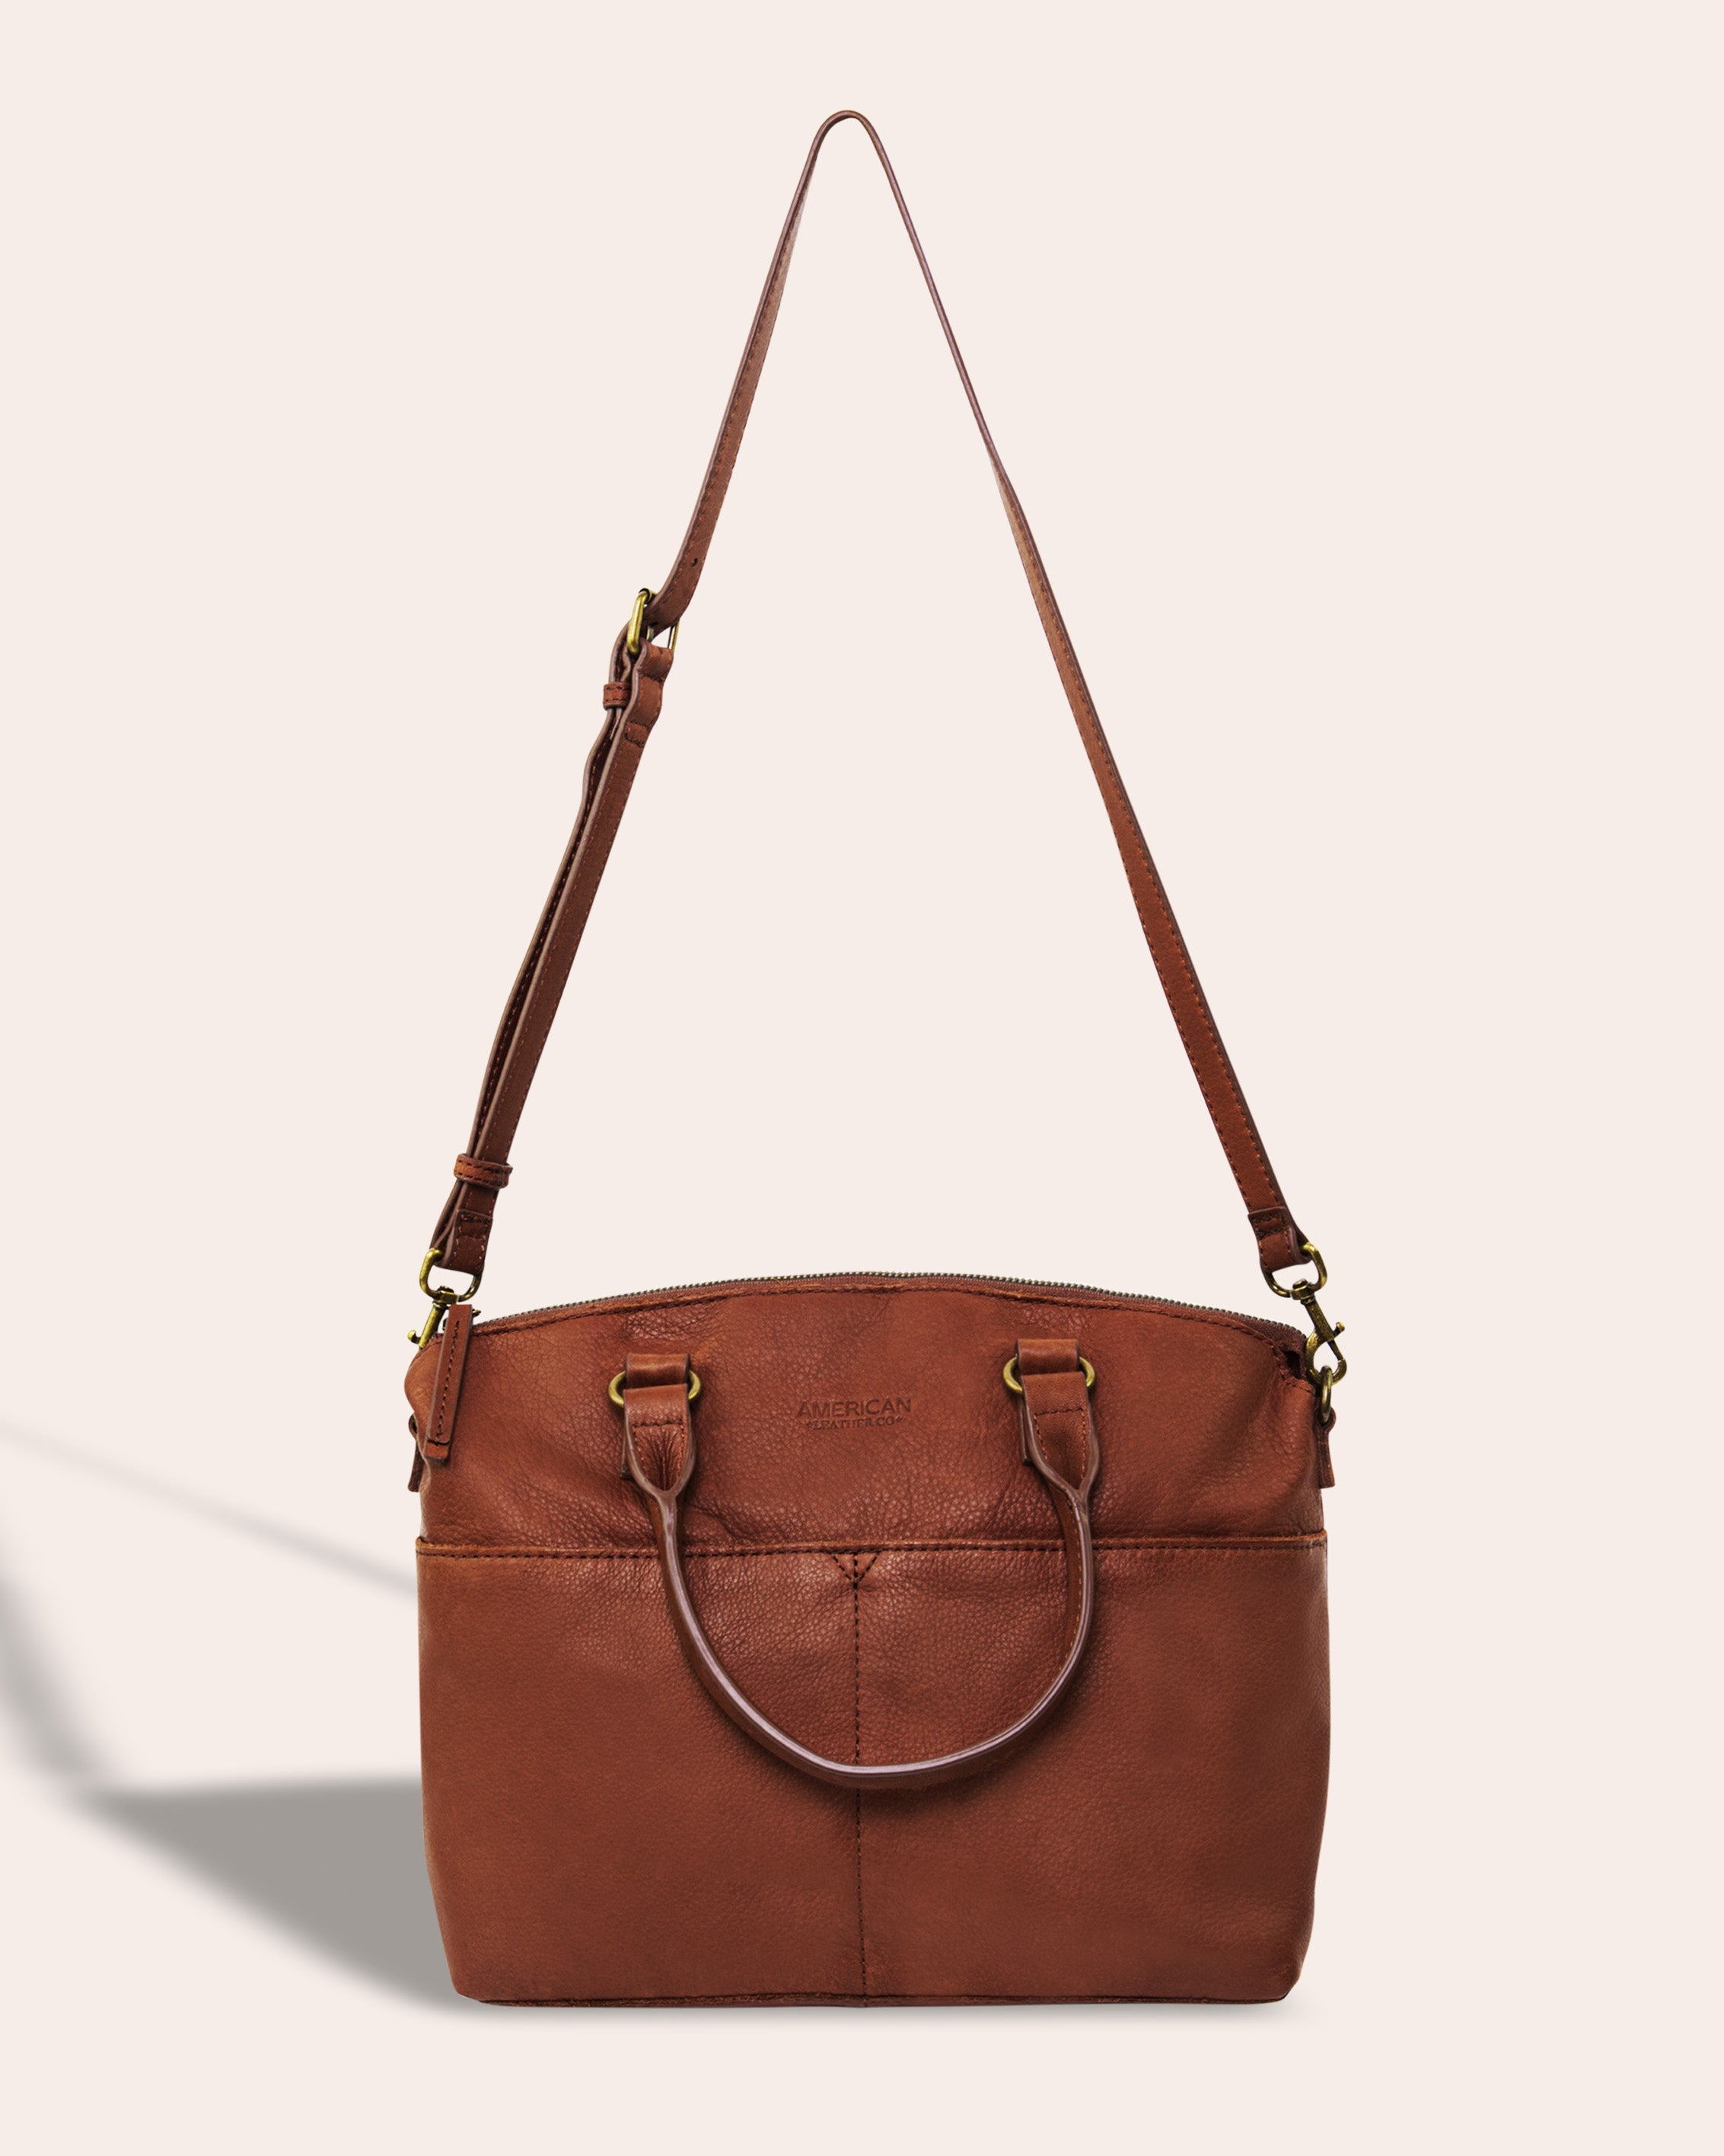 Princess street dome satchel leather crossbody bag Coach Brown in